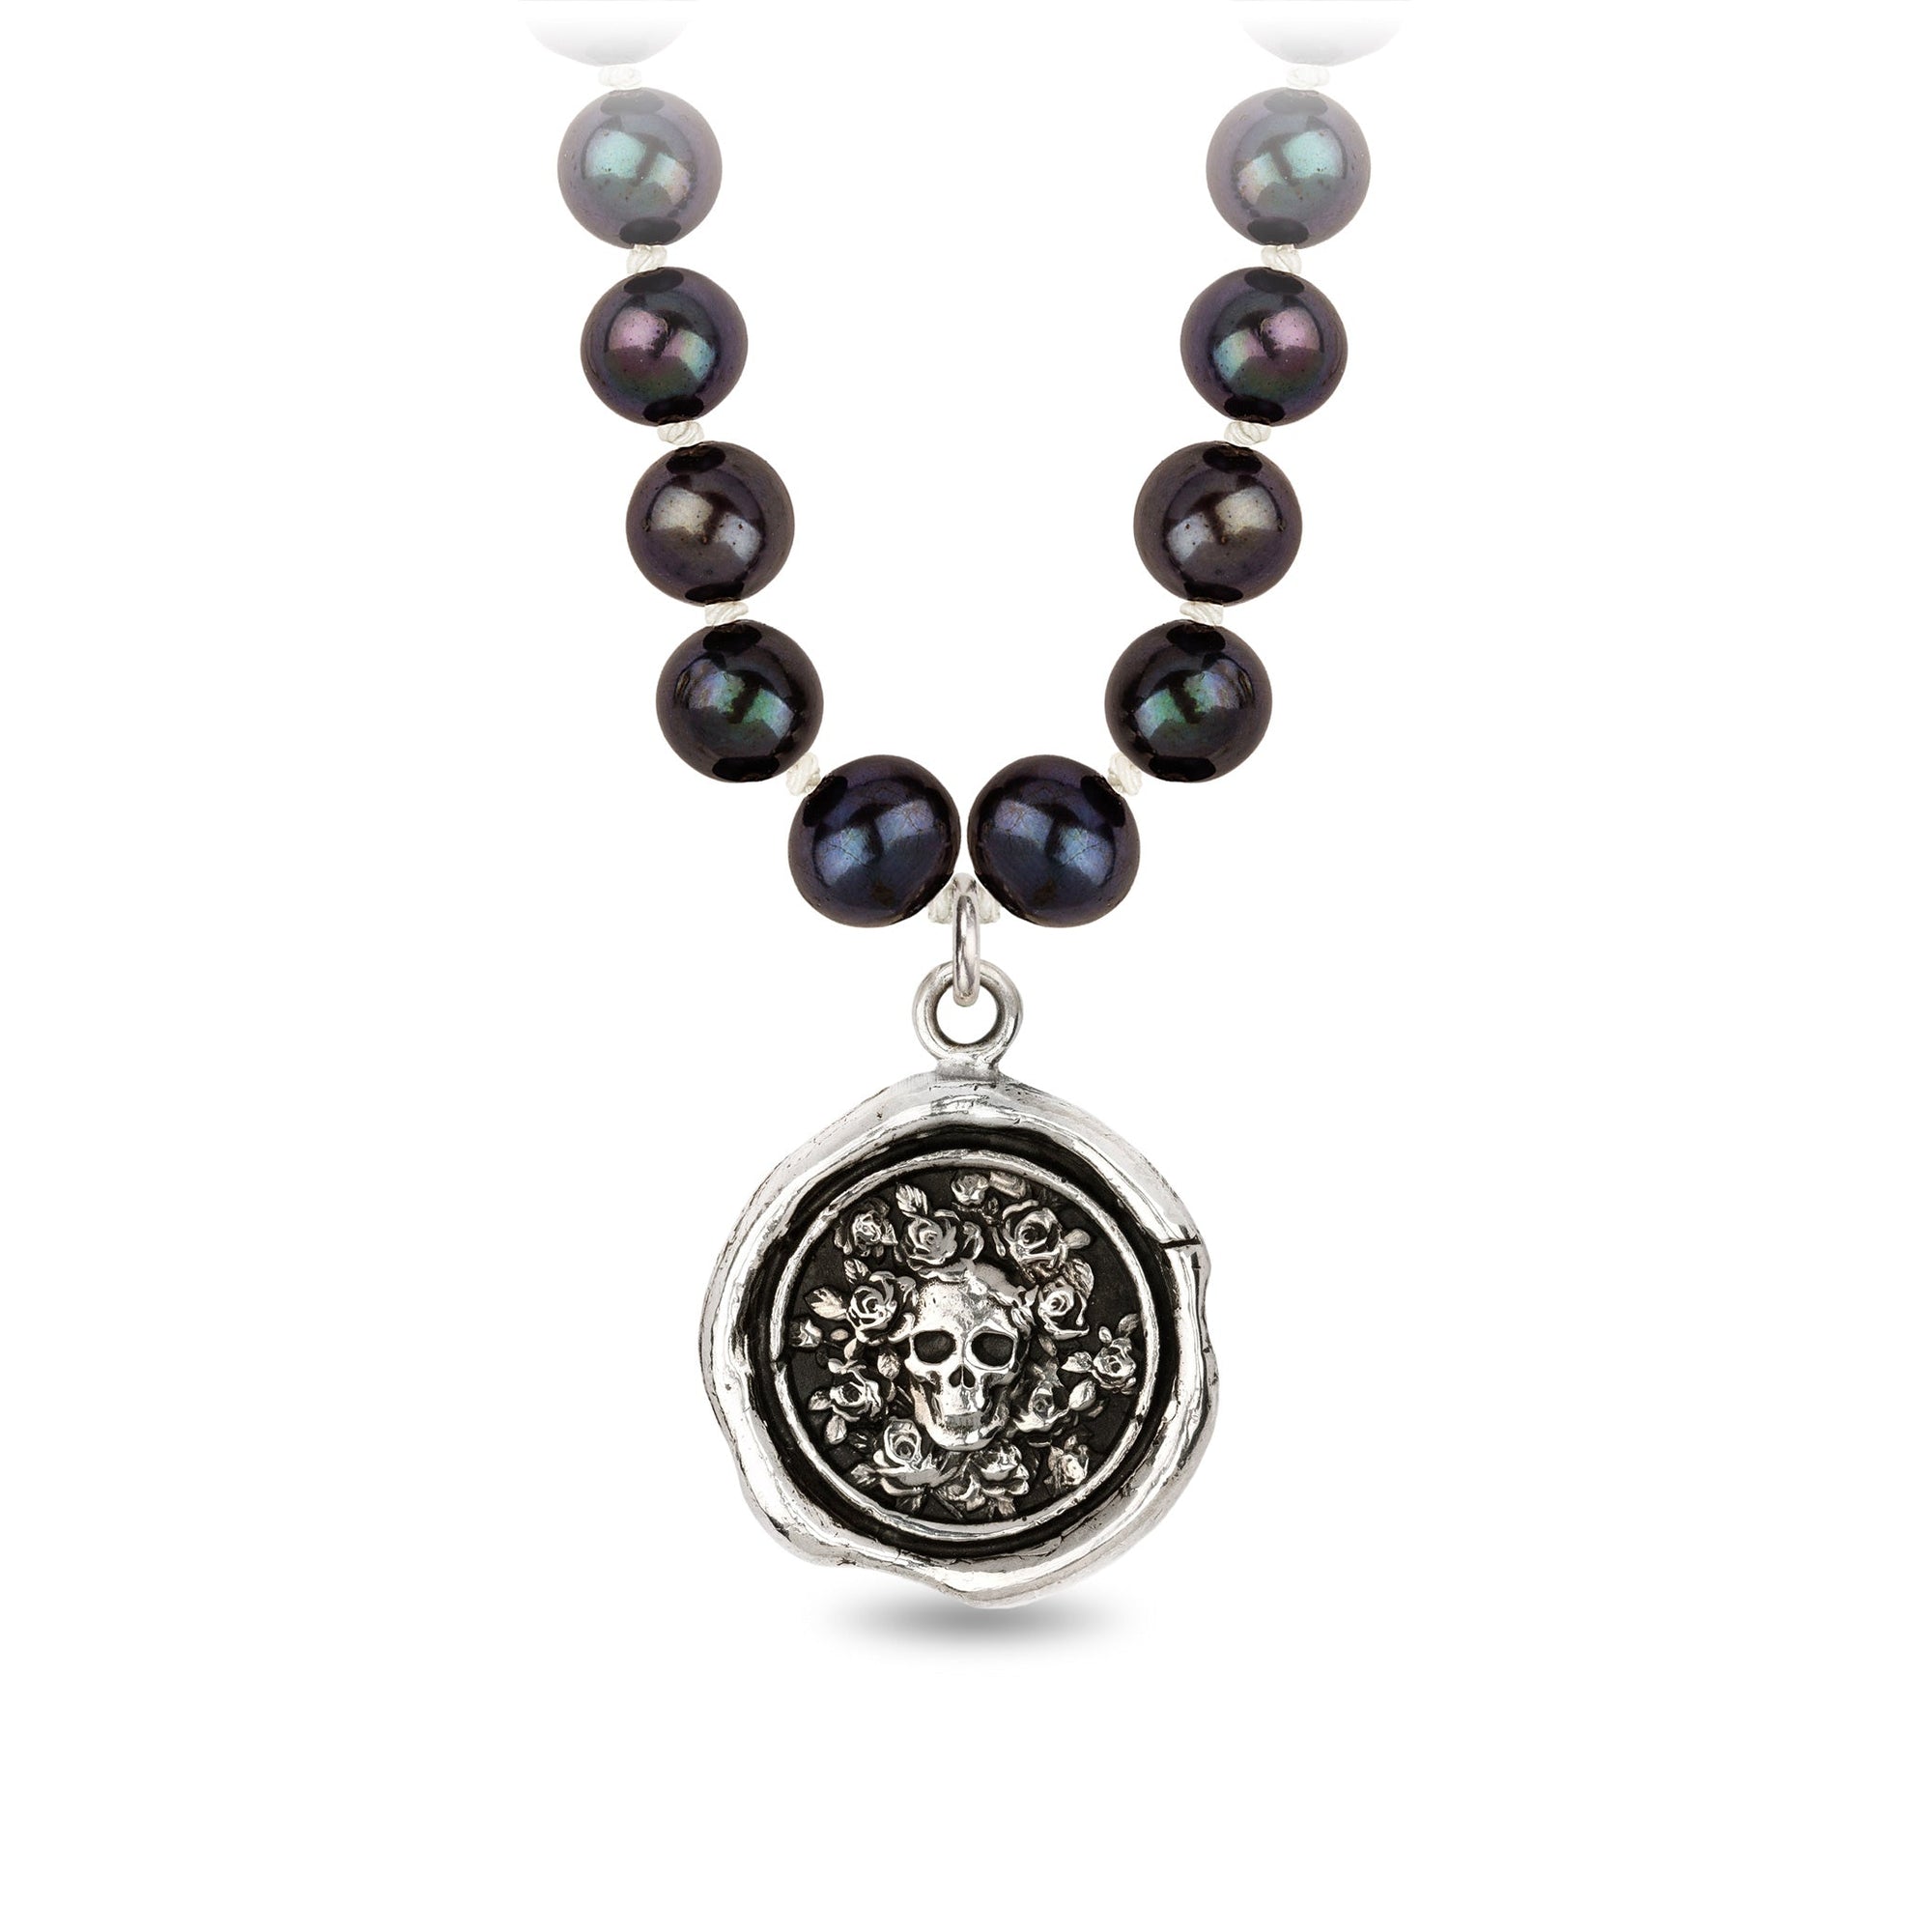 Live Every Moment Freshwater Pearl Necklace - Peacock Black